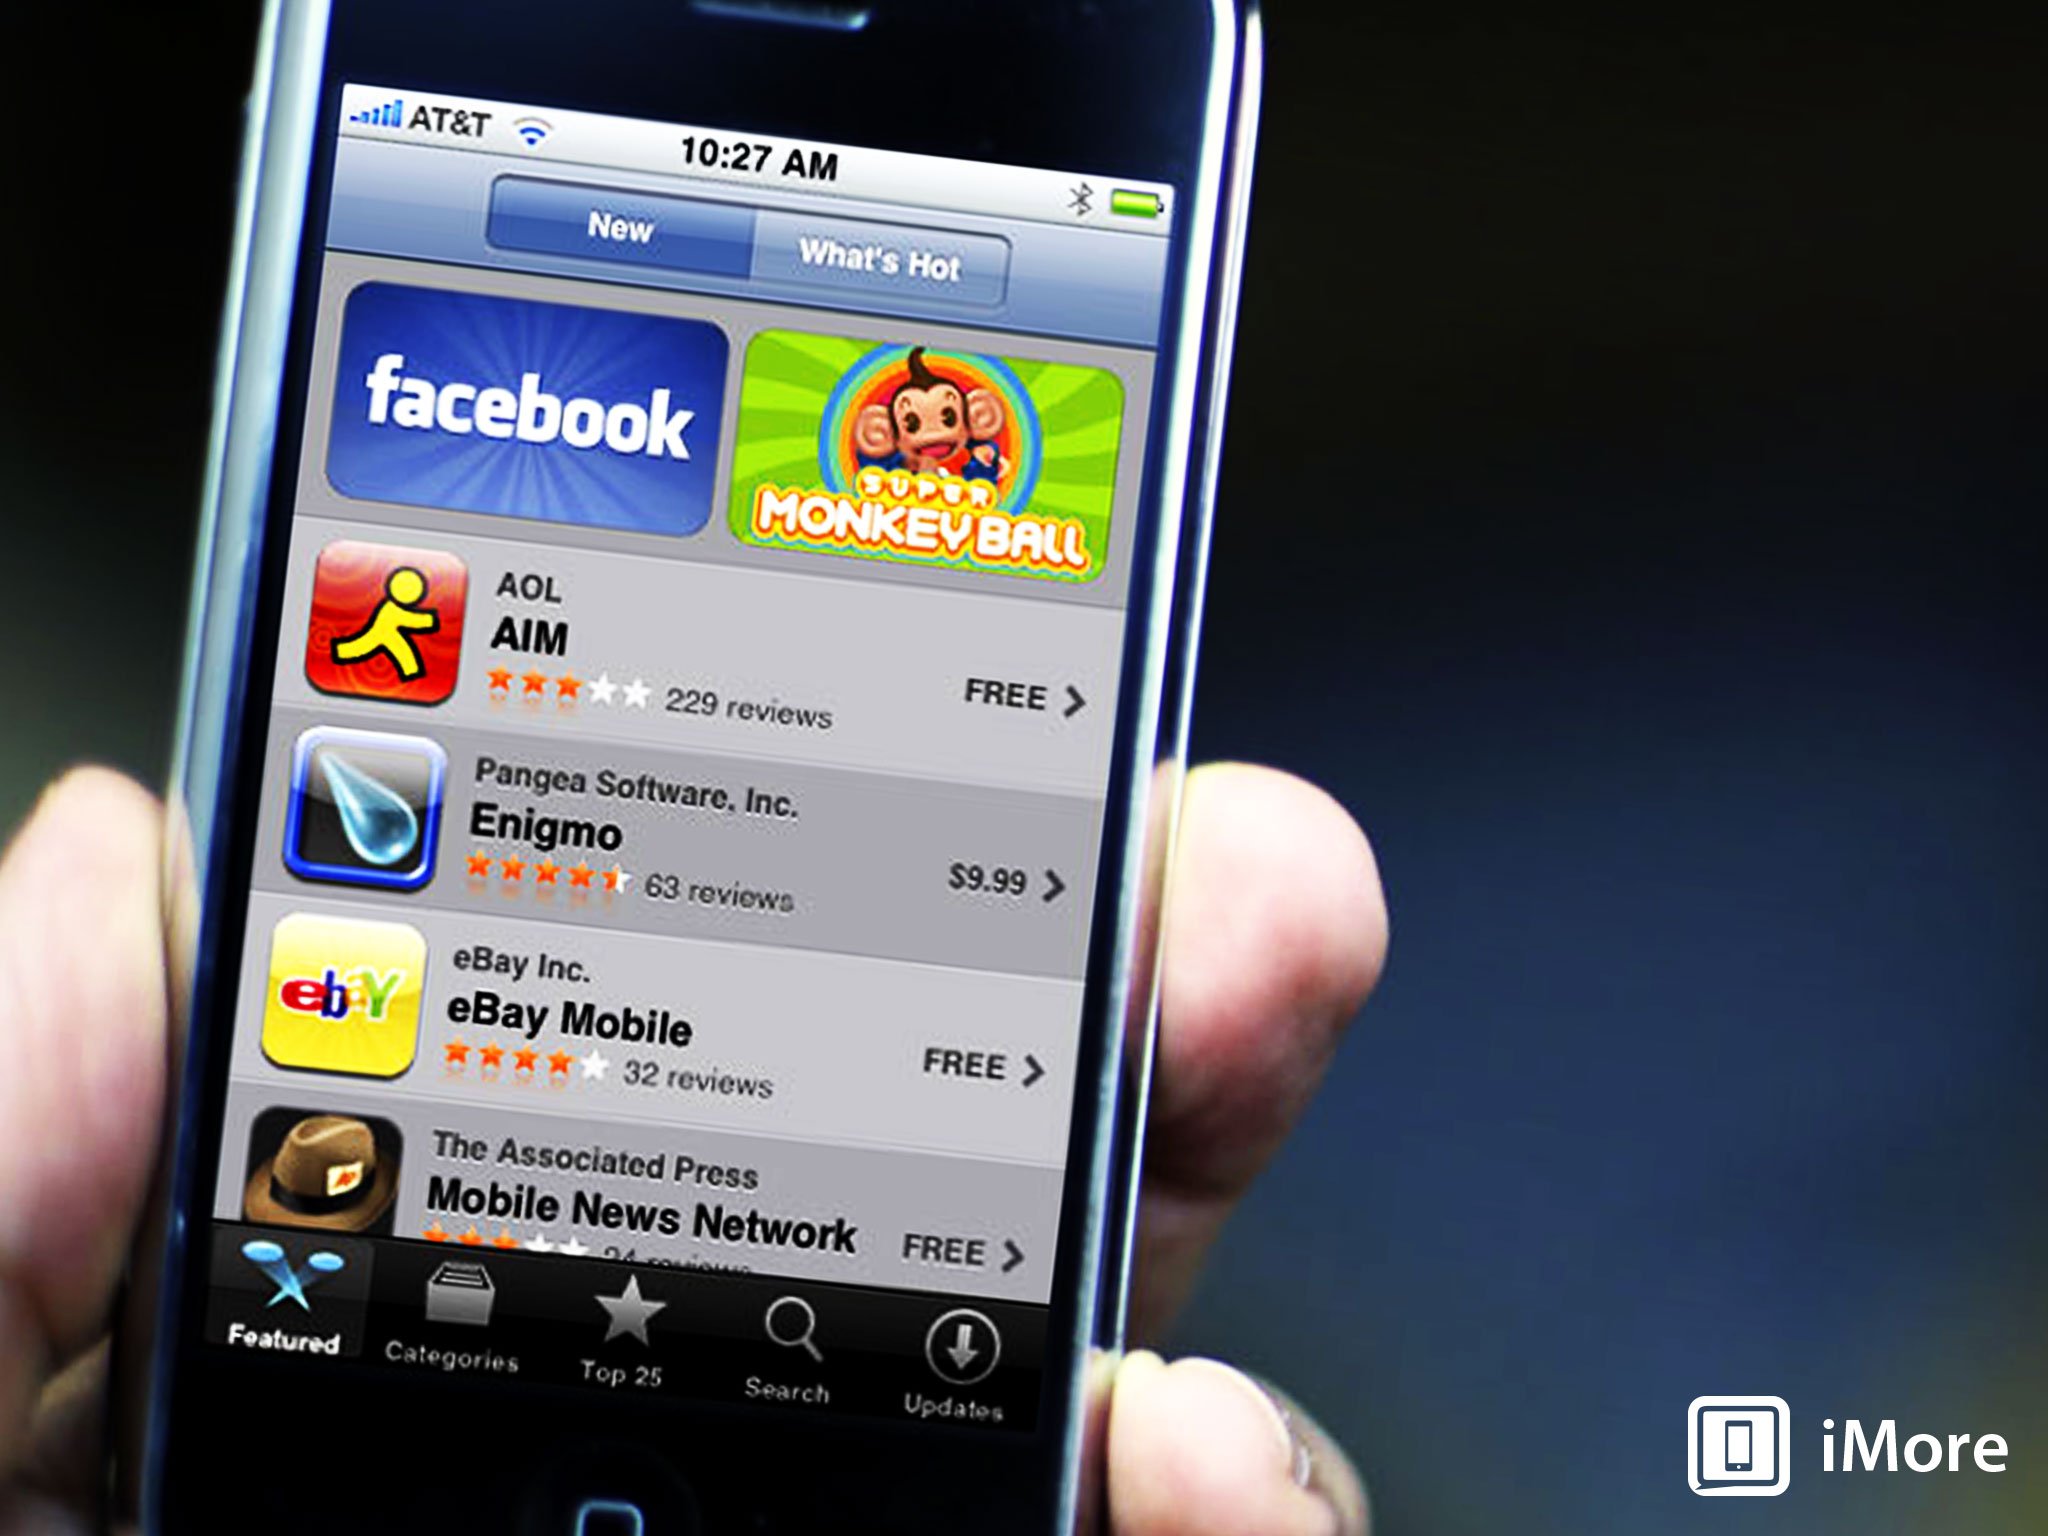 10 years ago today, the App Store changed everything | iMore